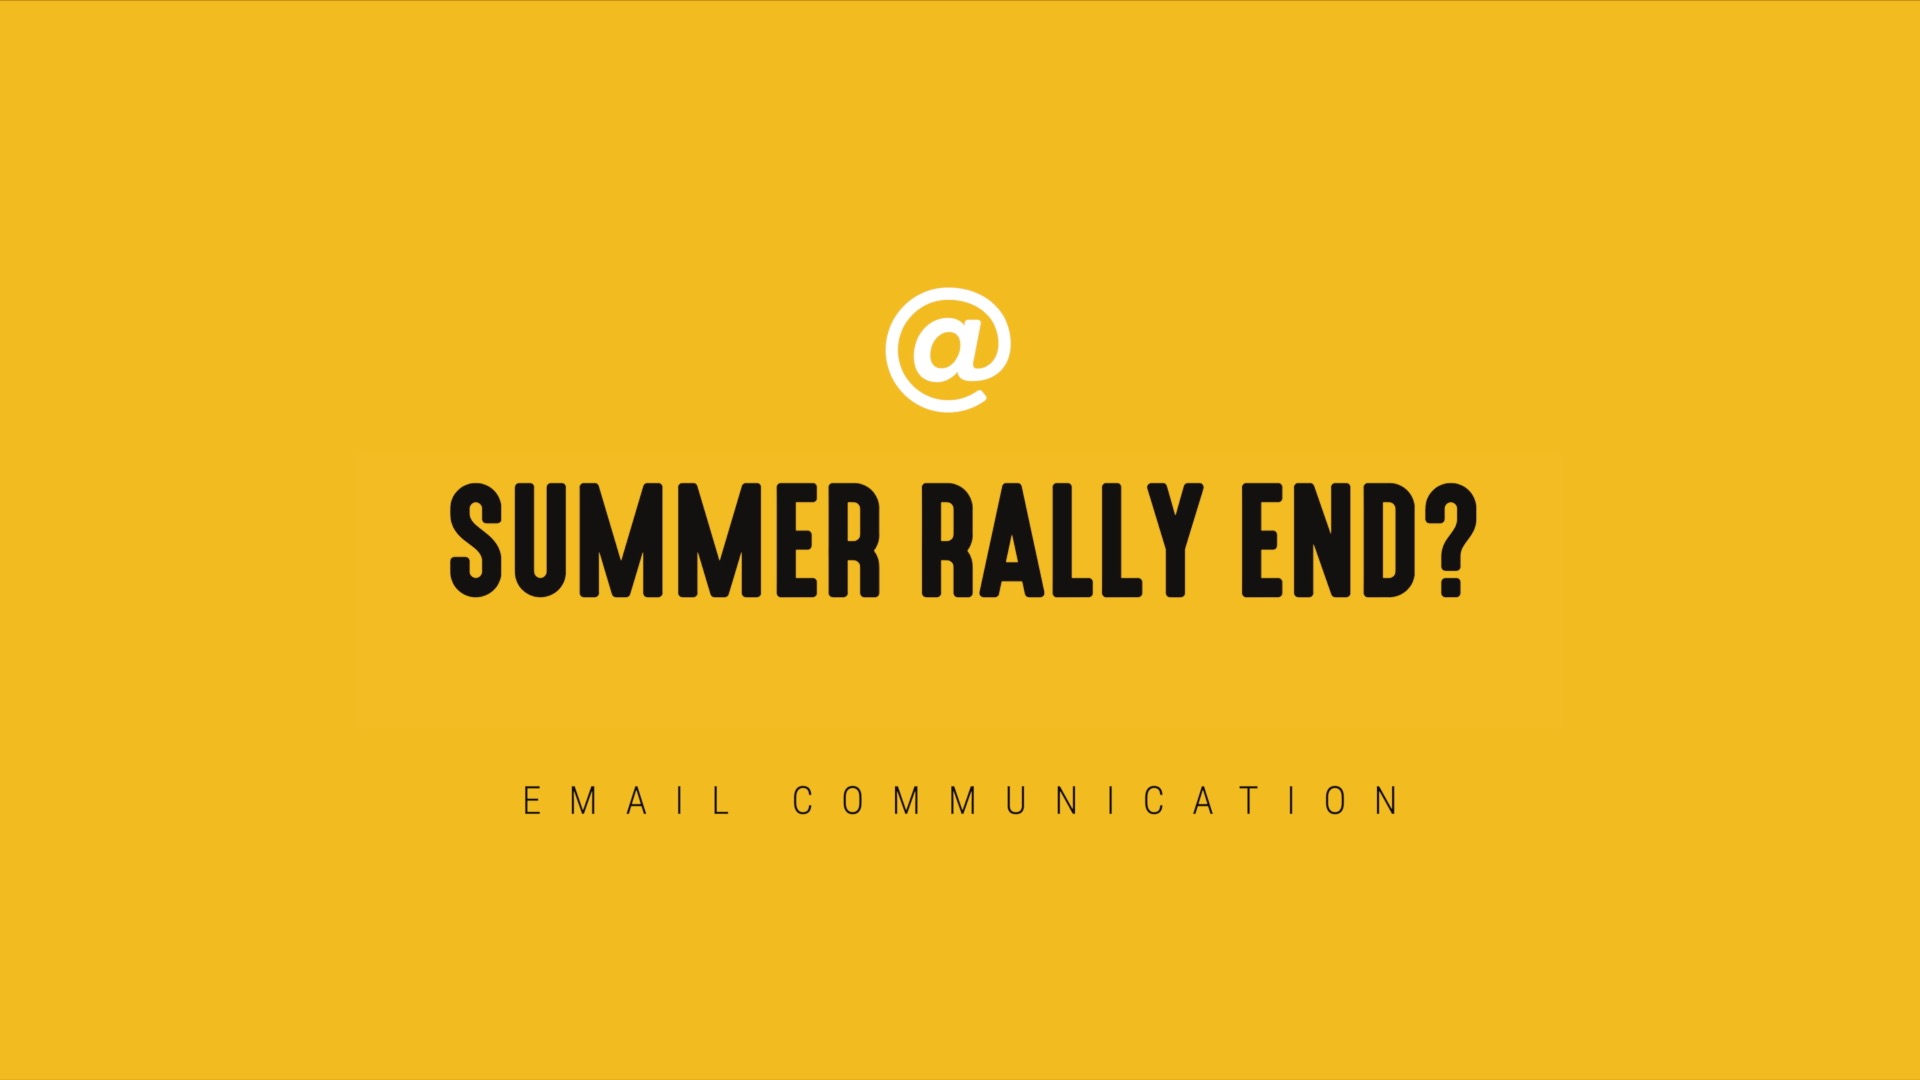 [NEW] Summer Rally End? - Timely Email